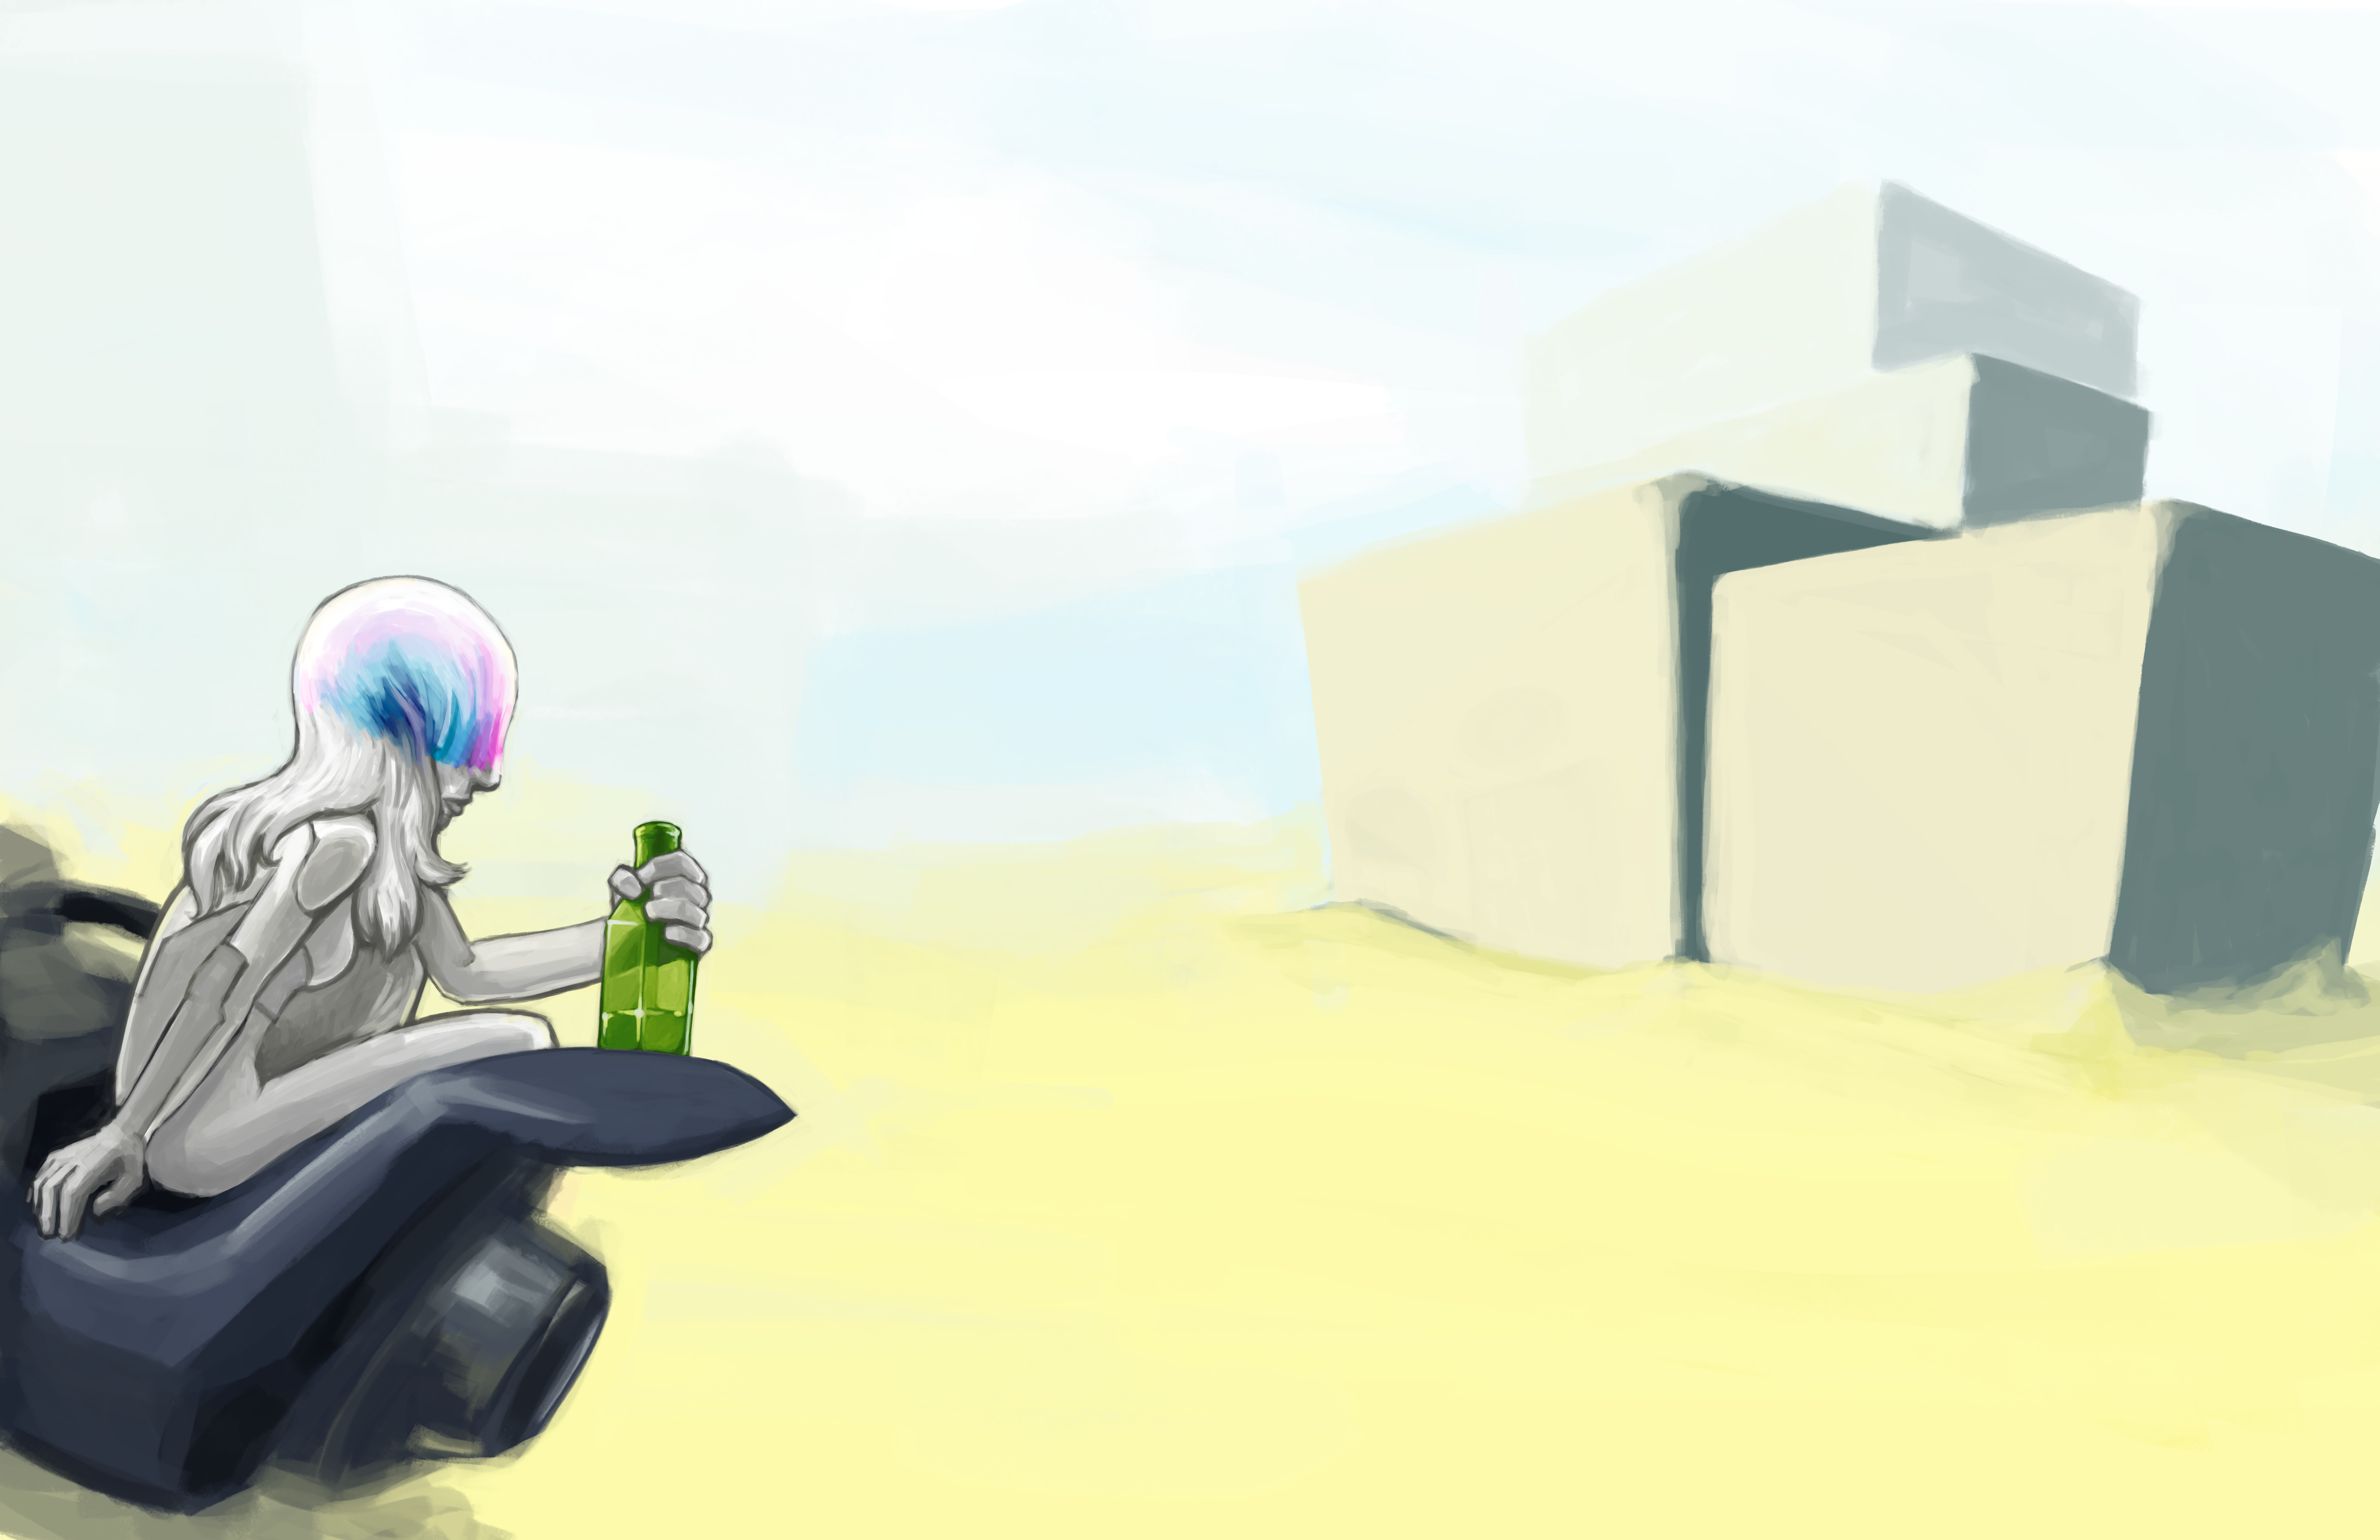 A futuristic character wearing a light-based helmet sitting on a hover bike, drinking from a square green bottle, looking at distant buildings in an urban desert landscape